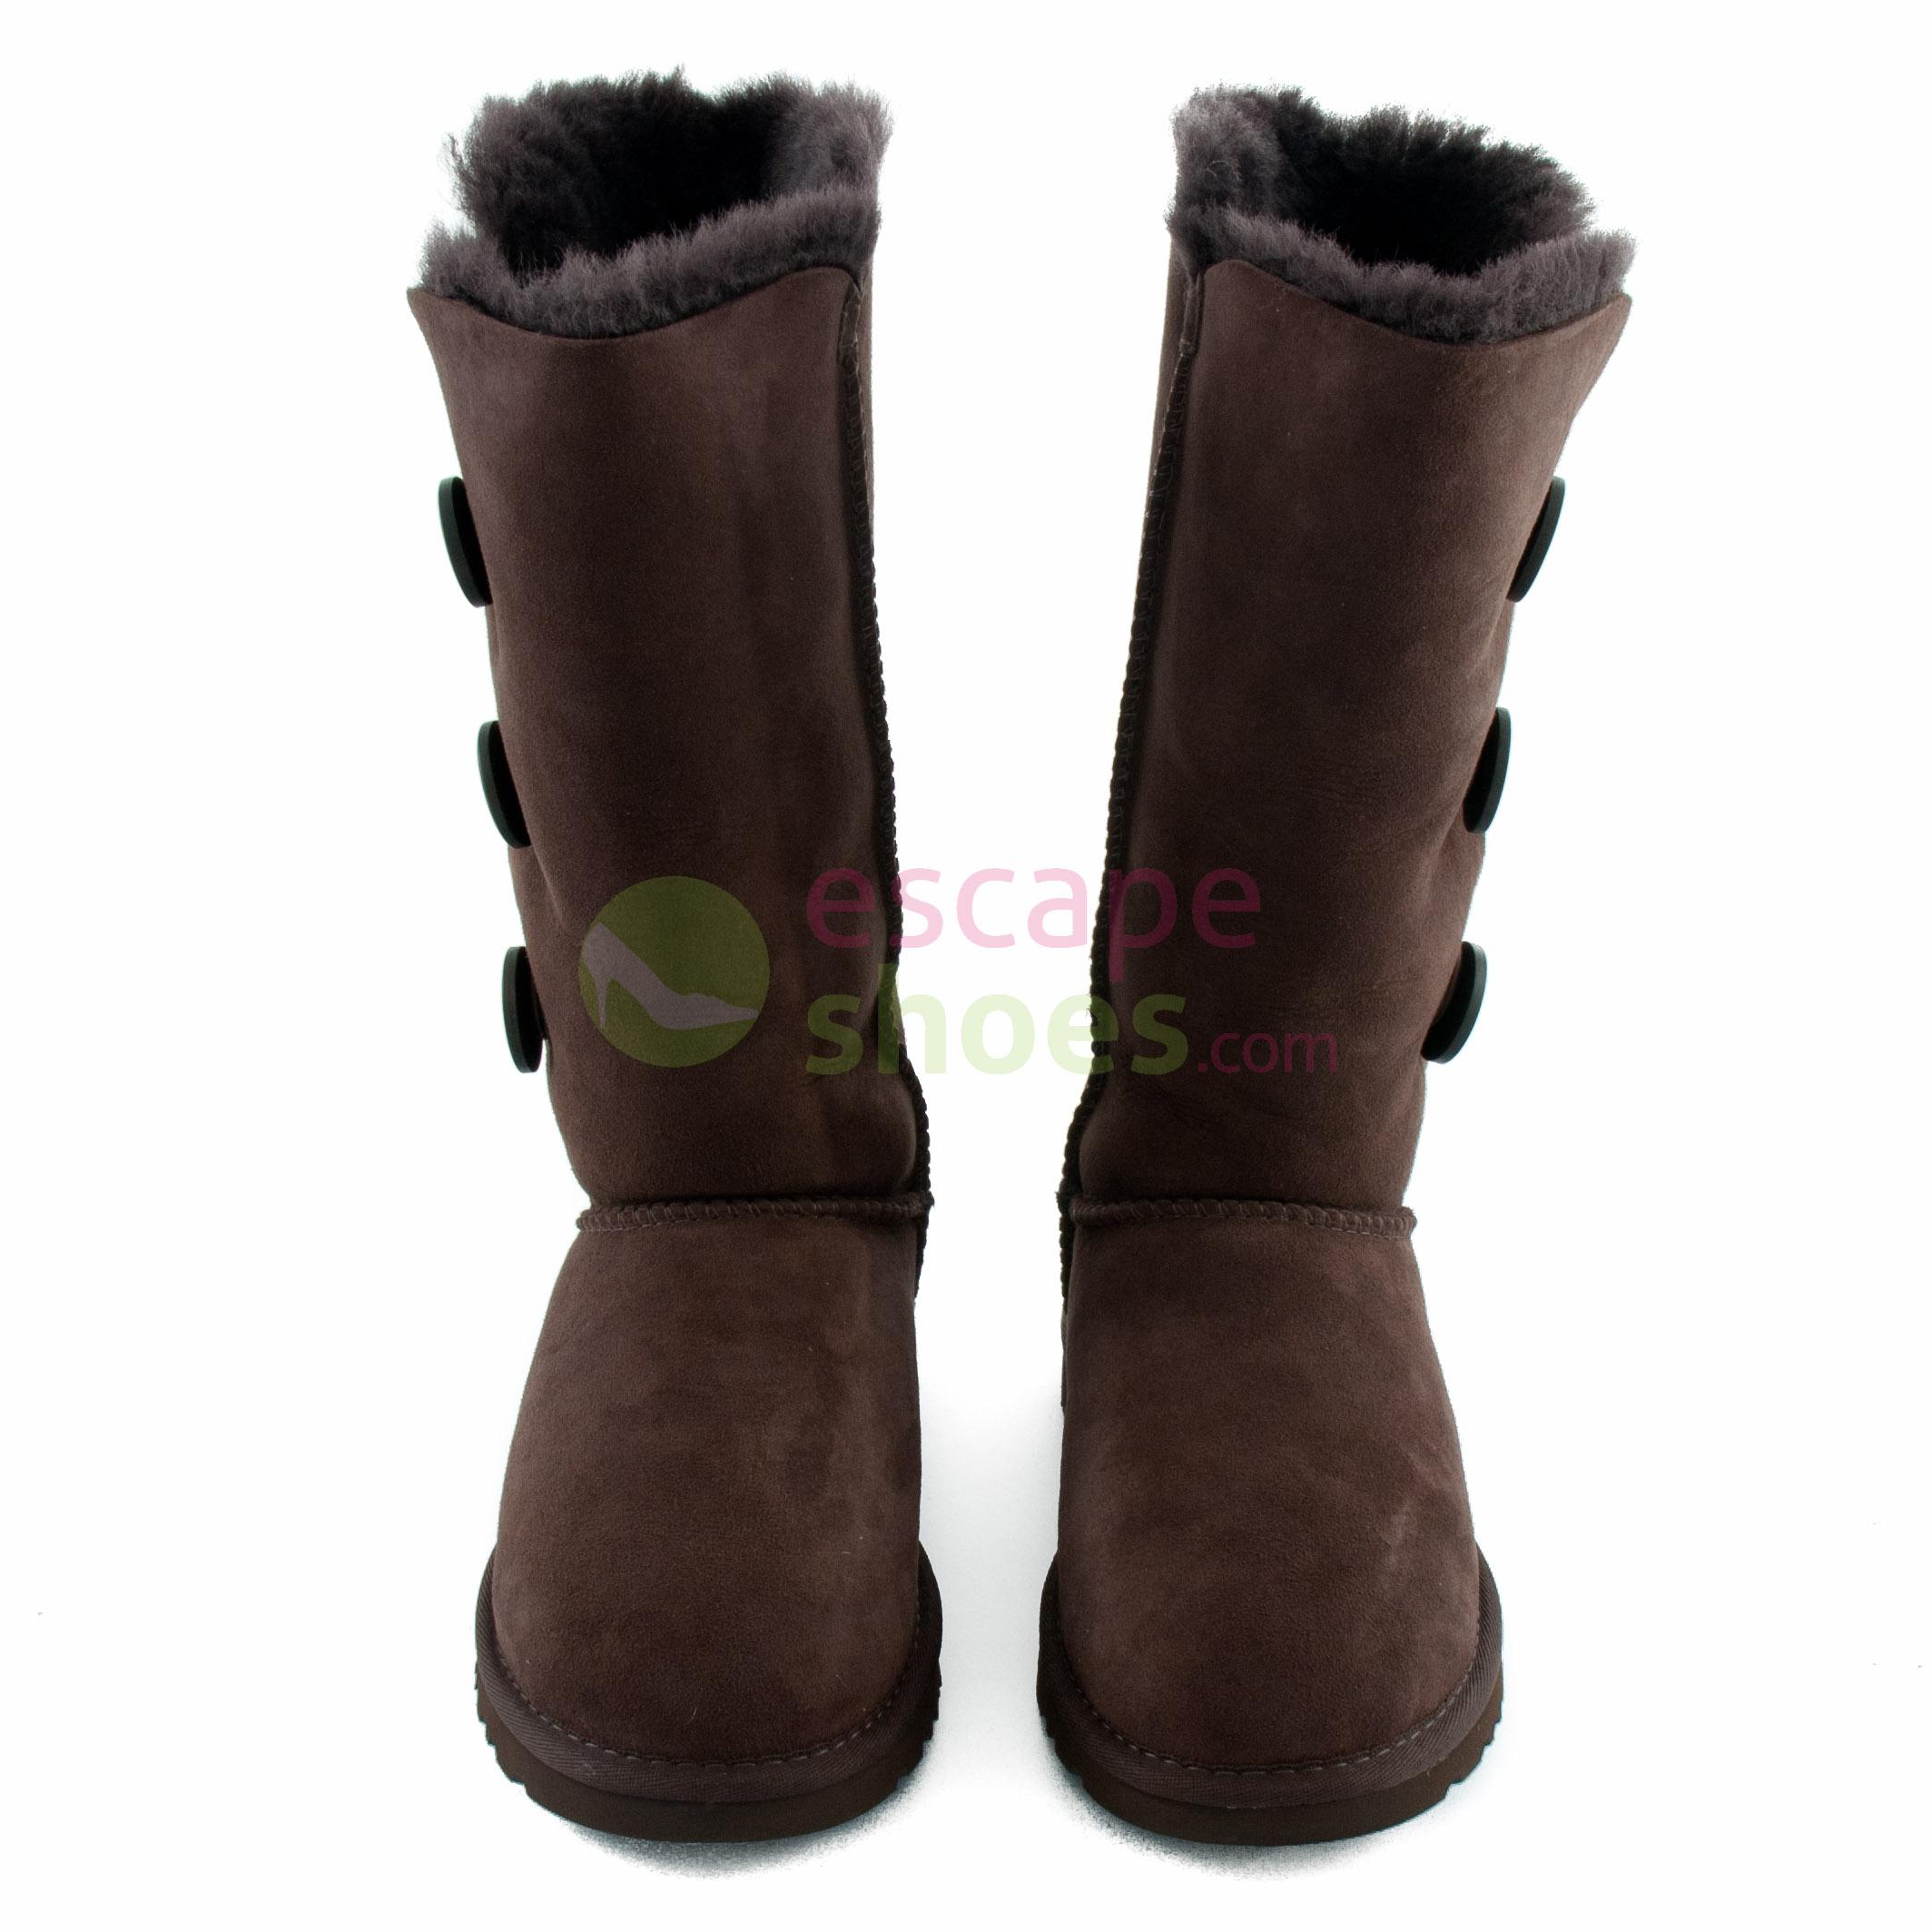 ugg bailey button triplet chocolate